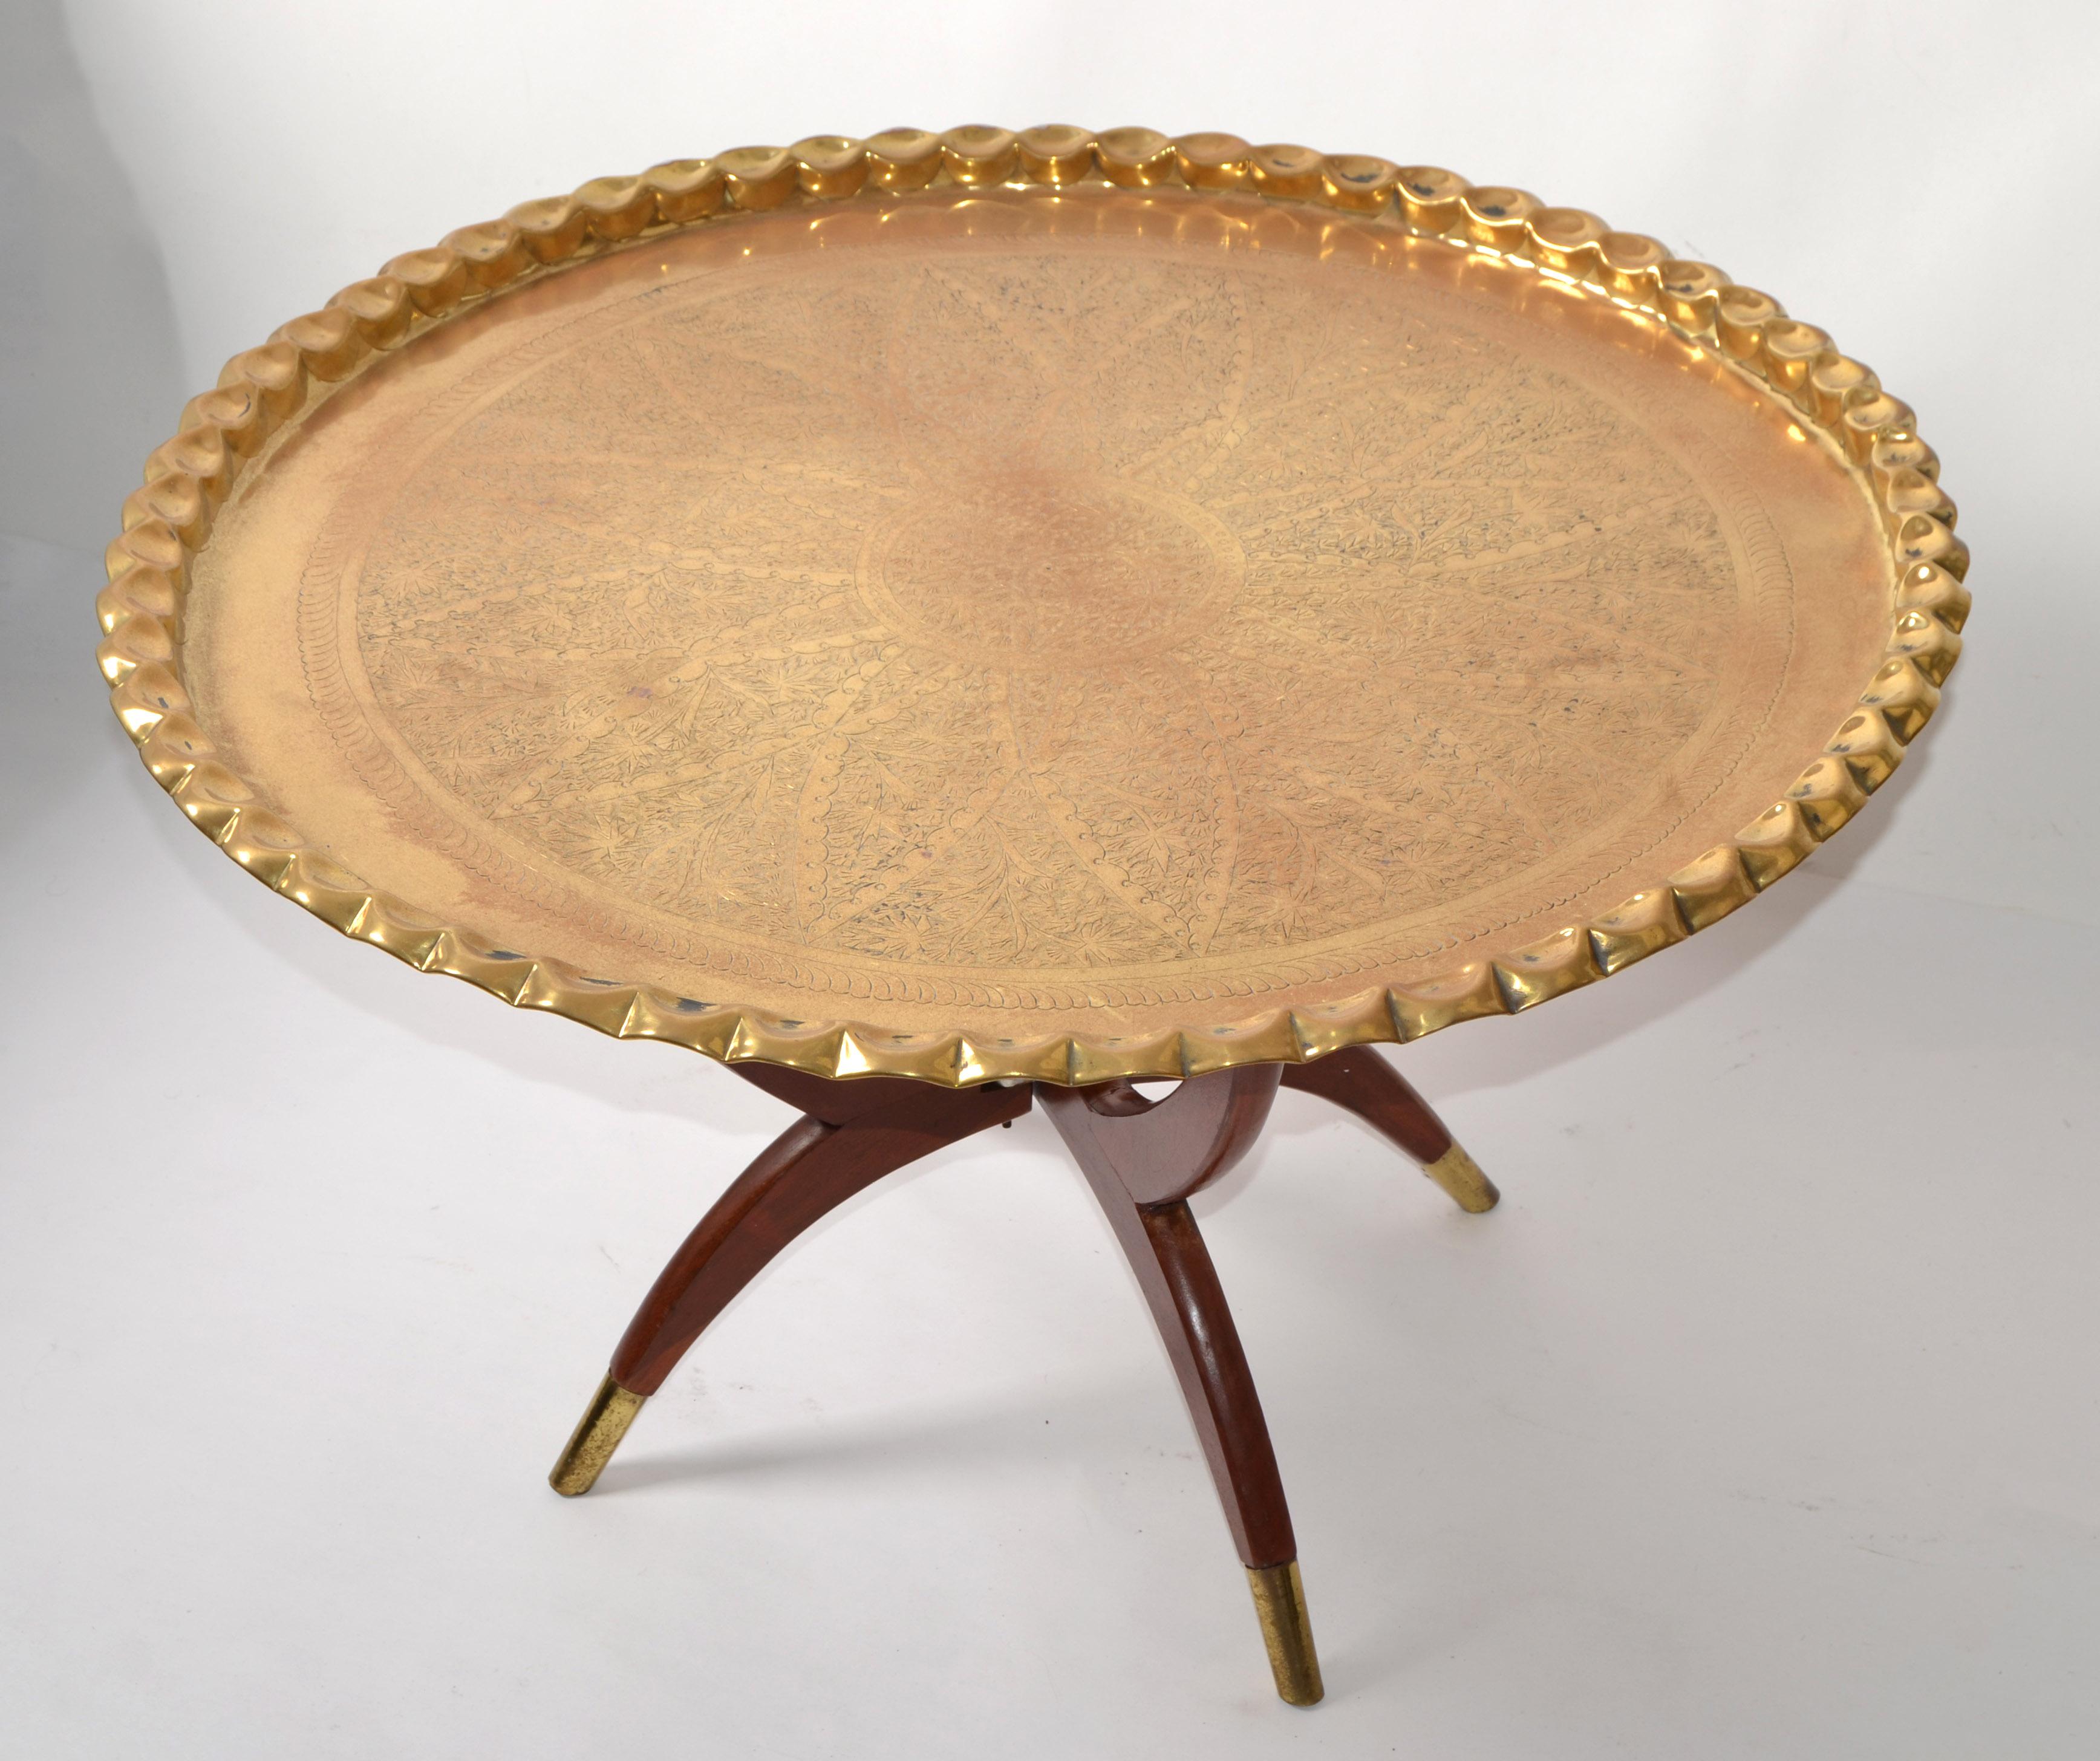 Danish Oriental Vintage Round Walnut Spider Leg and Bronze Moroccan Tray Coffee Table For Sale